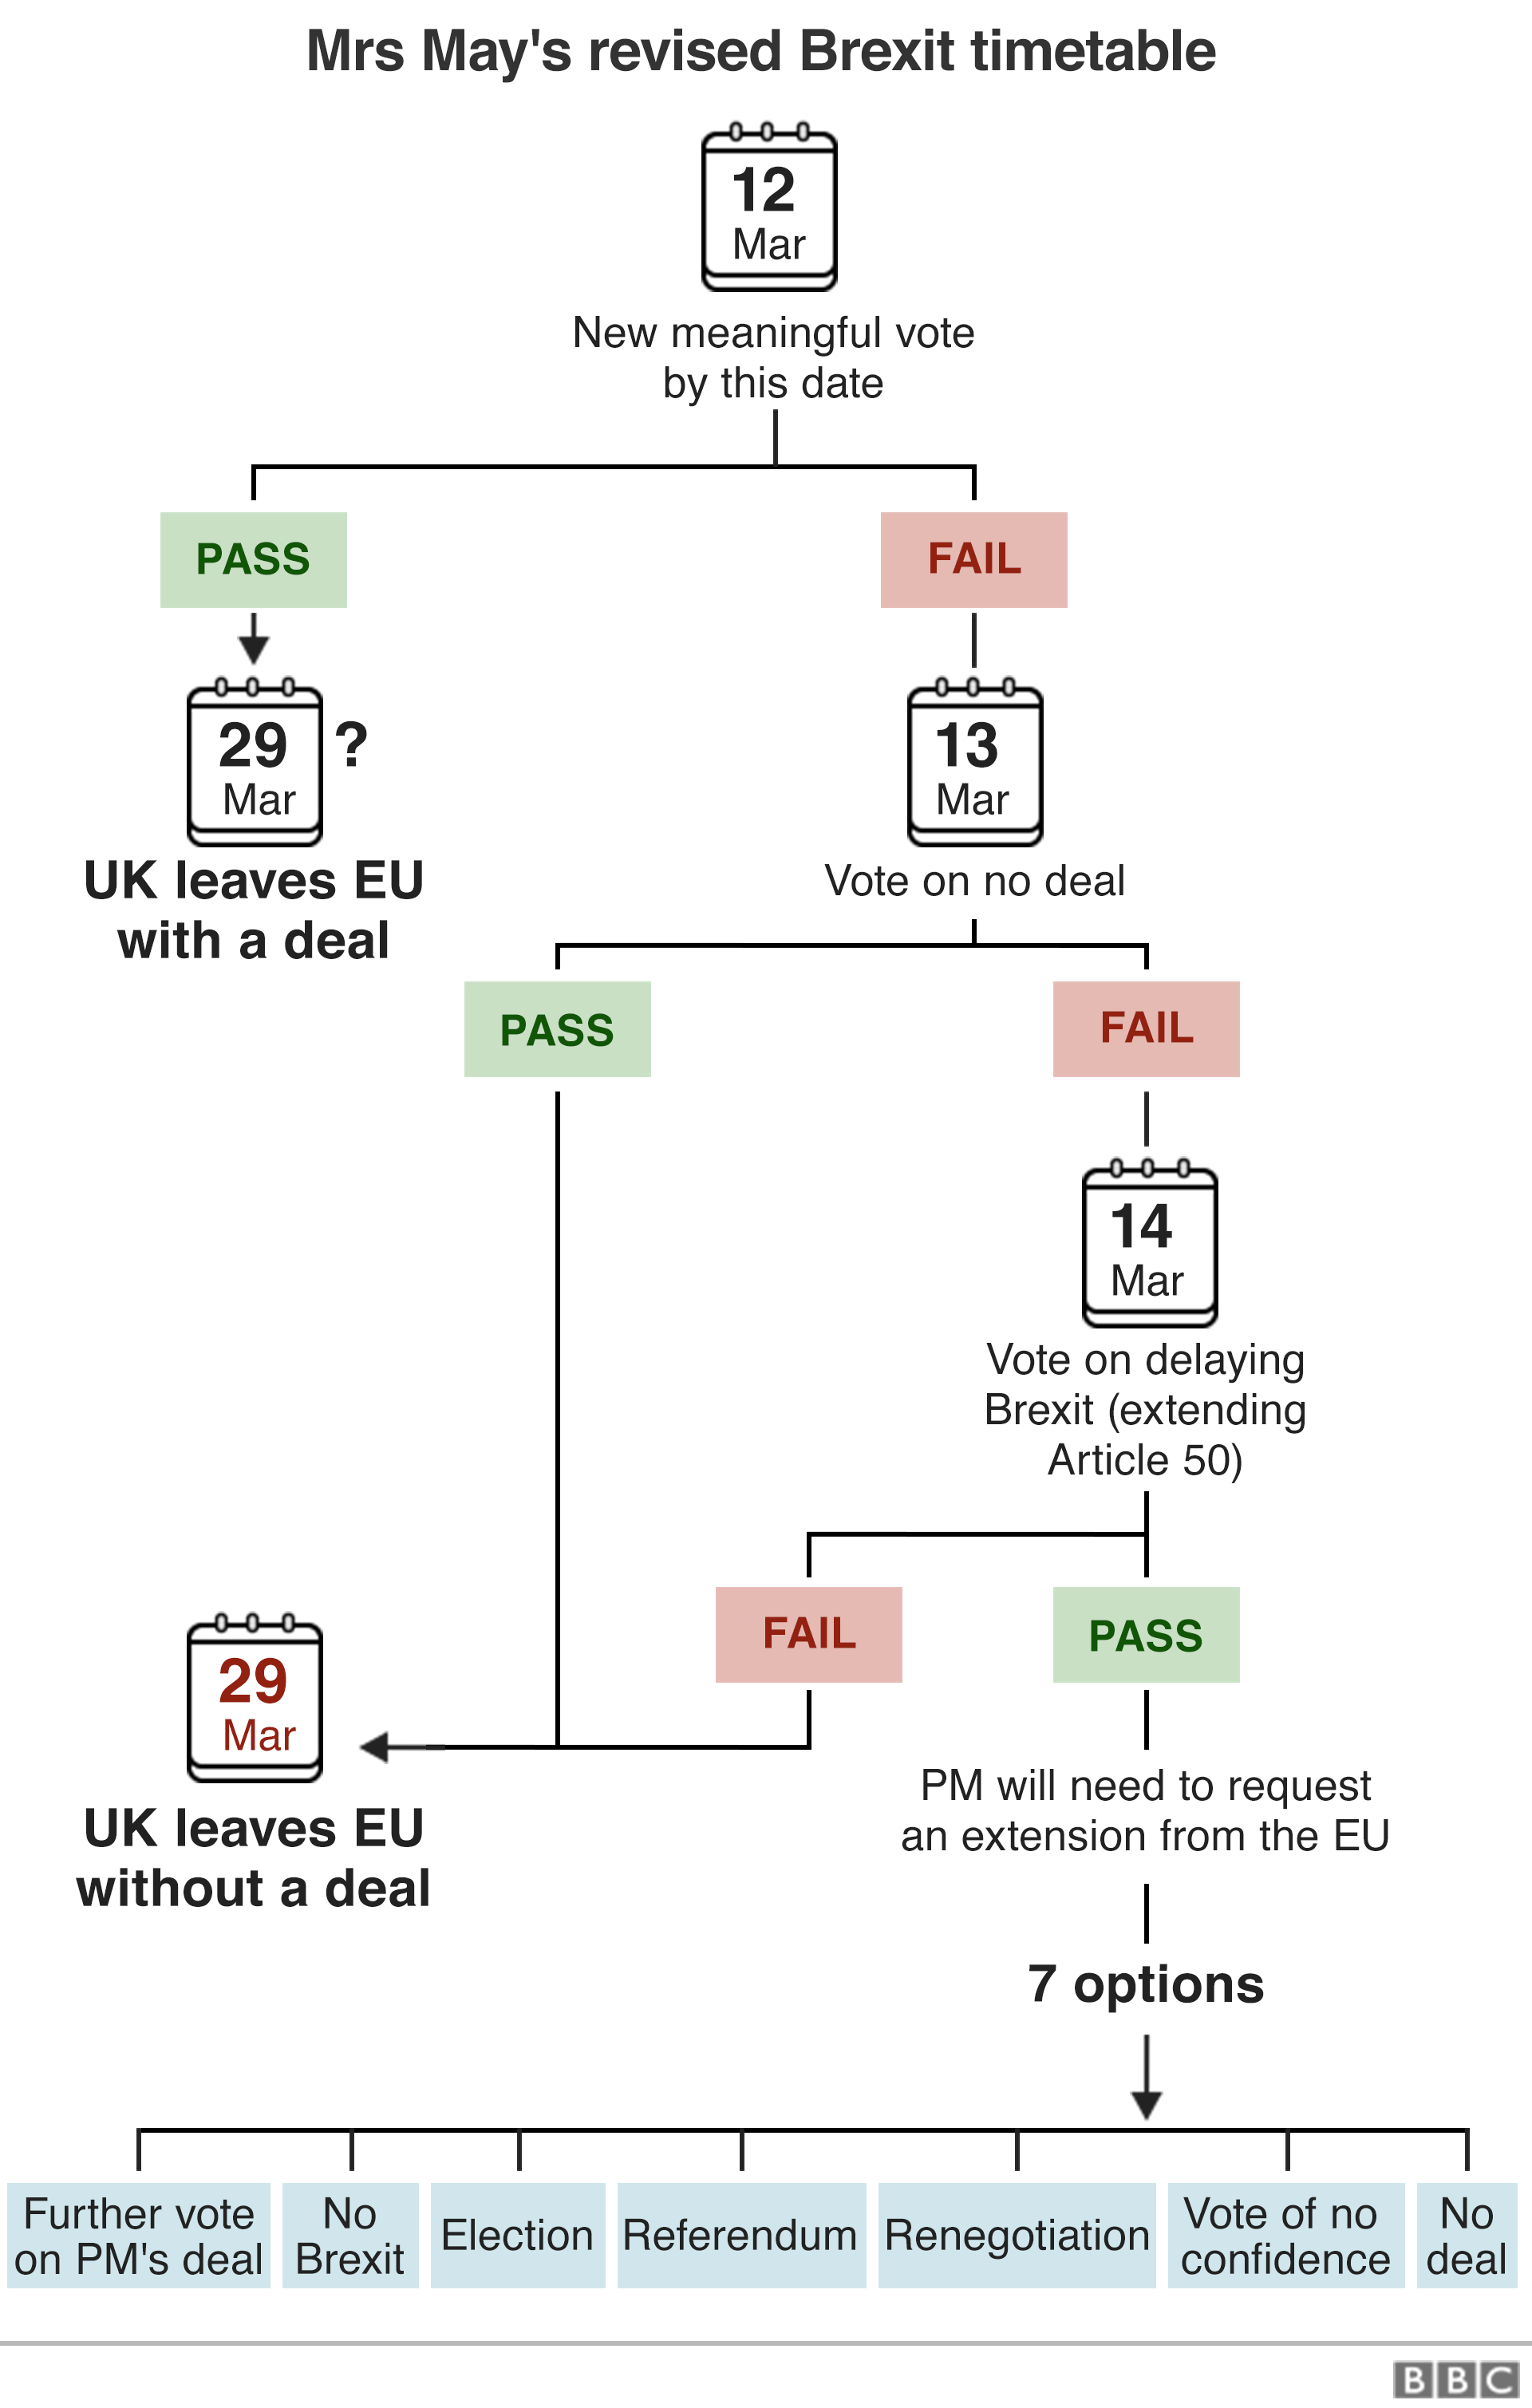 Flowchart showing revised timetable for Brexit, as announced by Mrs May on 26 Feb